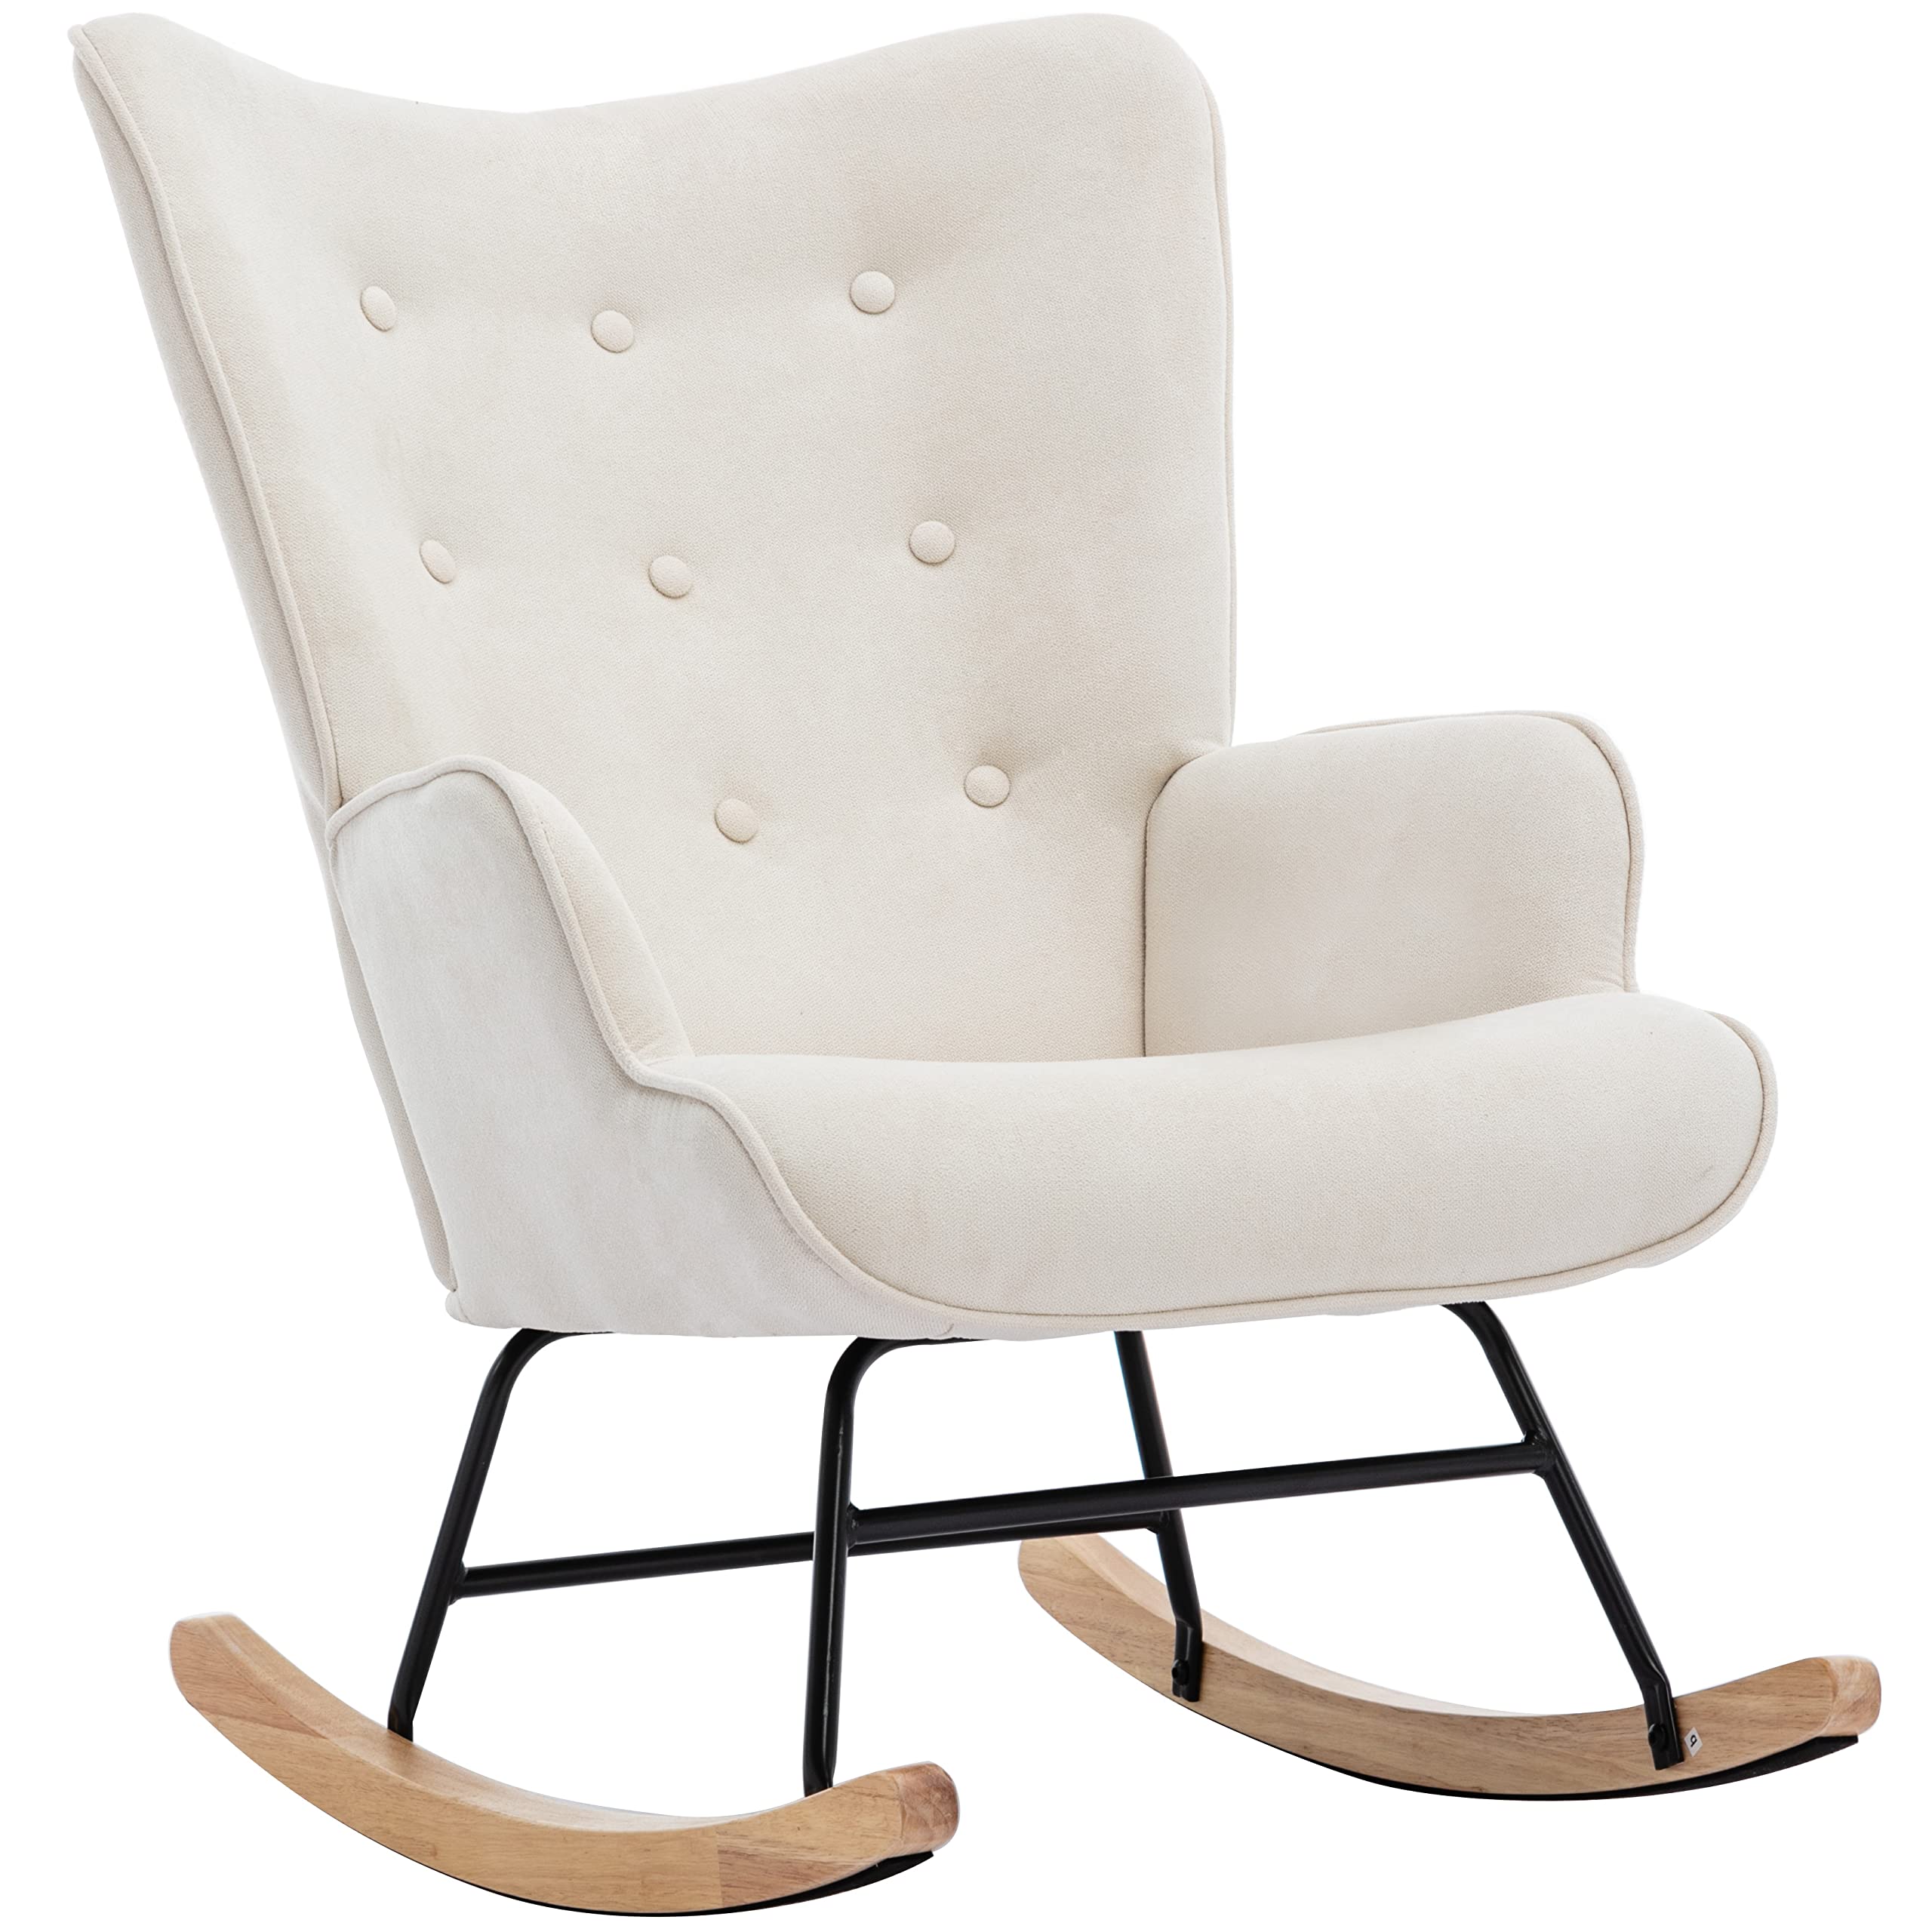 Accent Rocking Chair with Ottoman, Modern Tufted Button Wingback Glider Rocker Armchair with Solid Wood Legs, Beige